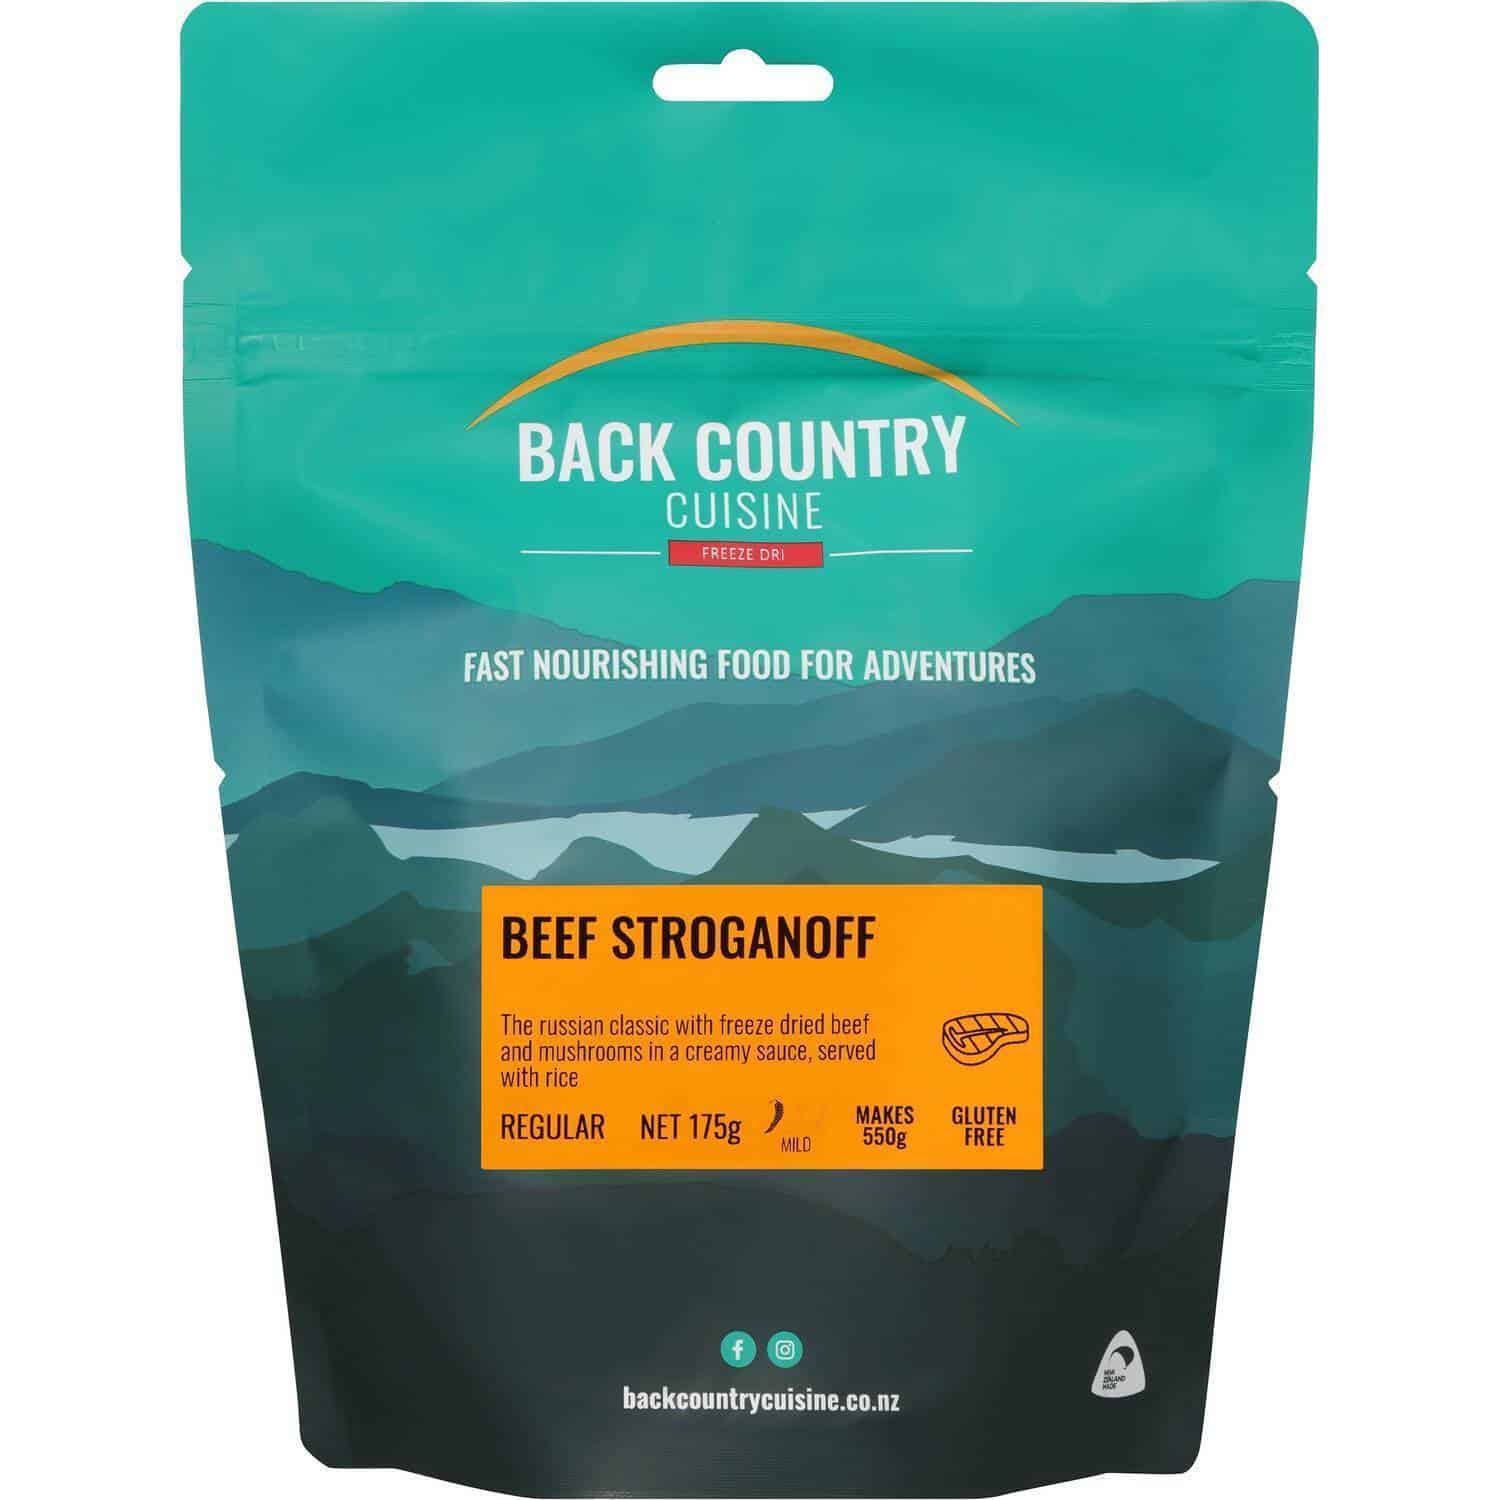 Back Country Cuisine Beef Stroganoff Regular - Tramping Food and Accessories sold by Venture Outdoors NZ